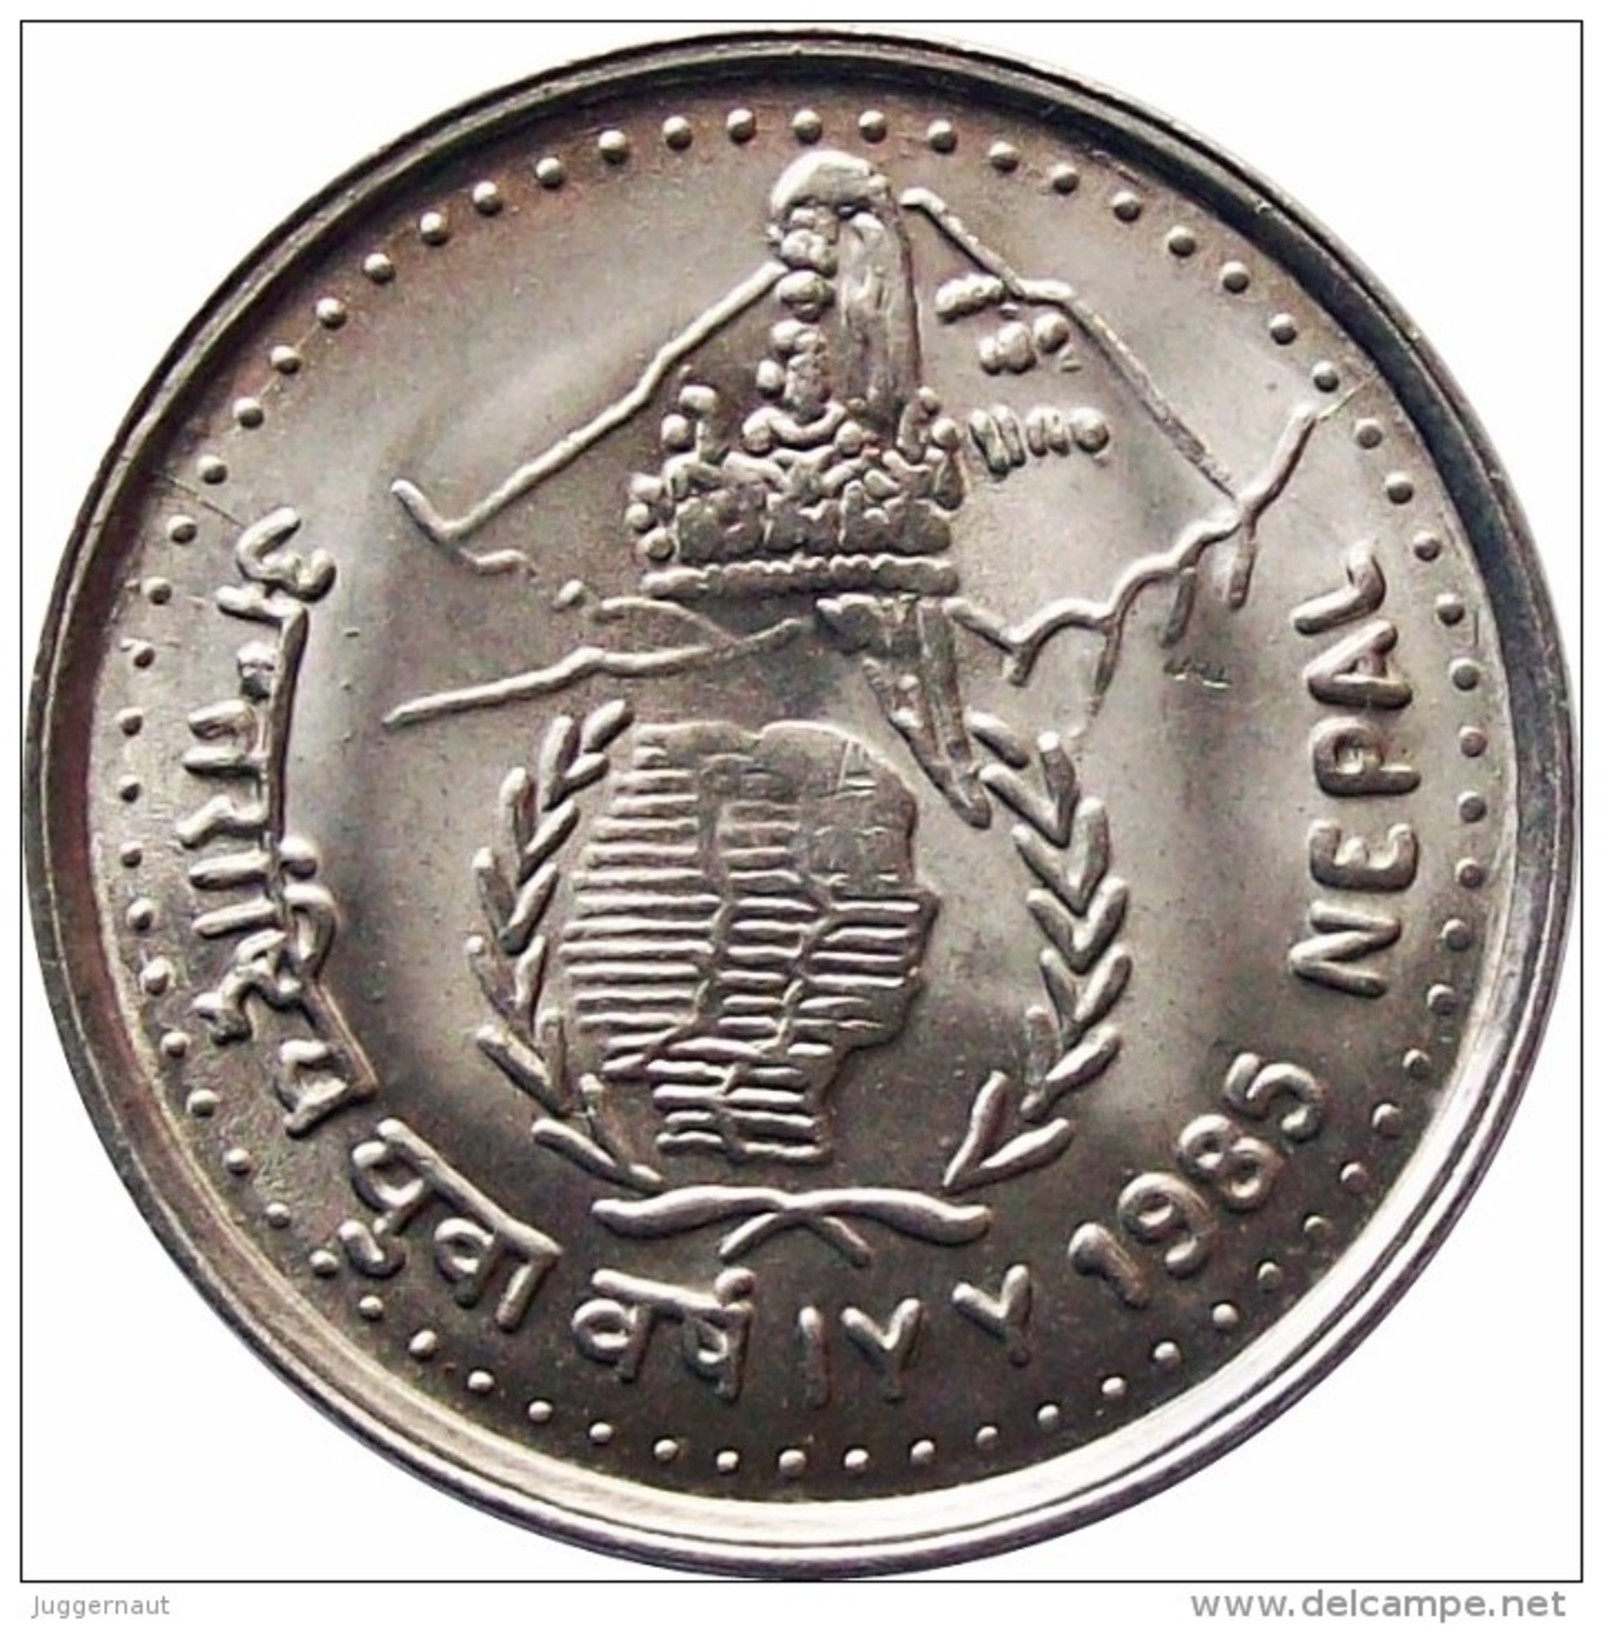 INTERNATIONAL YOUTH YEAR COMMEMORATIVE COIN NEPAL 1985 KM-1023 UNCIRCULATED UNC - Nepal